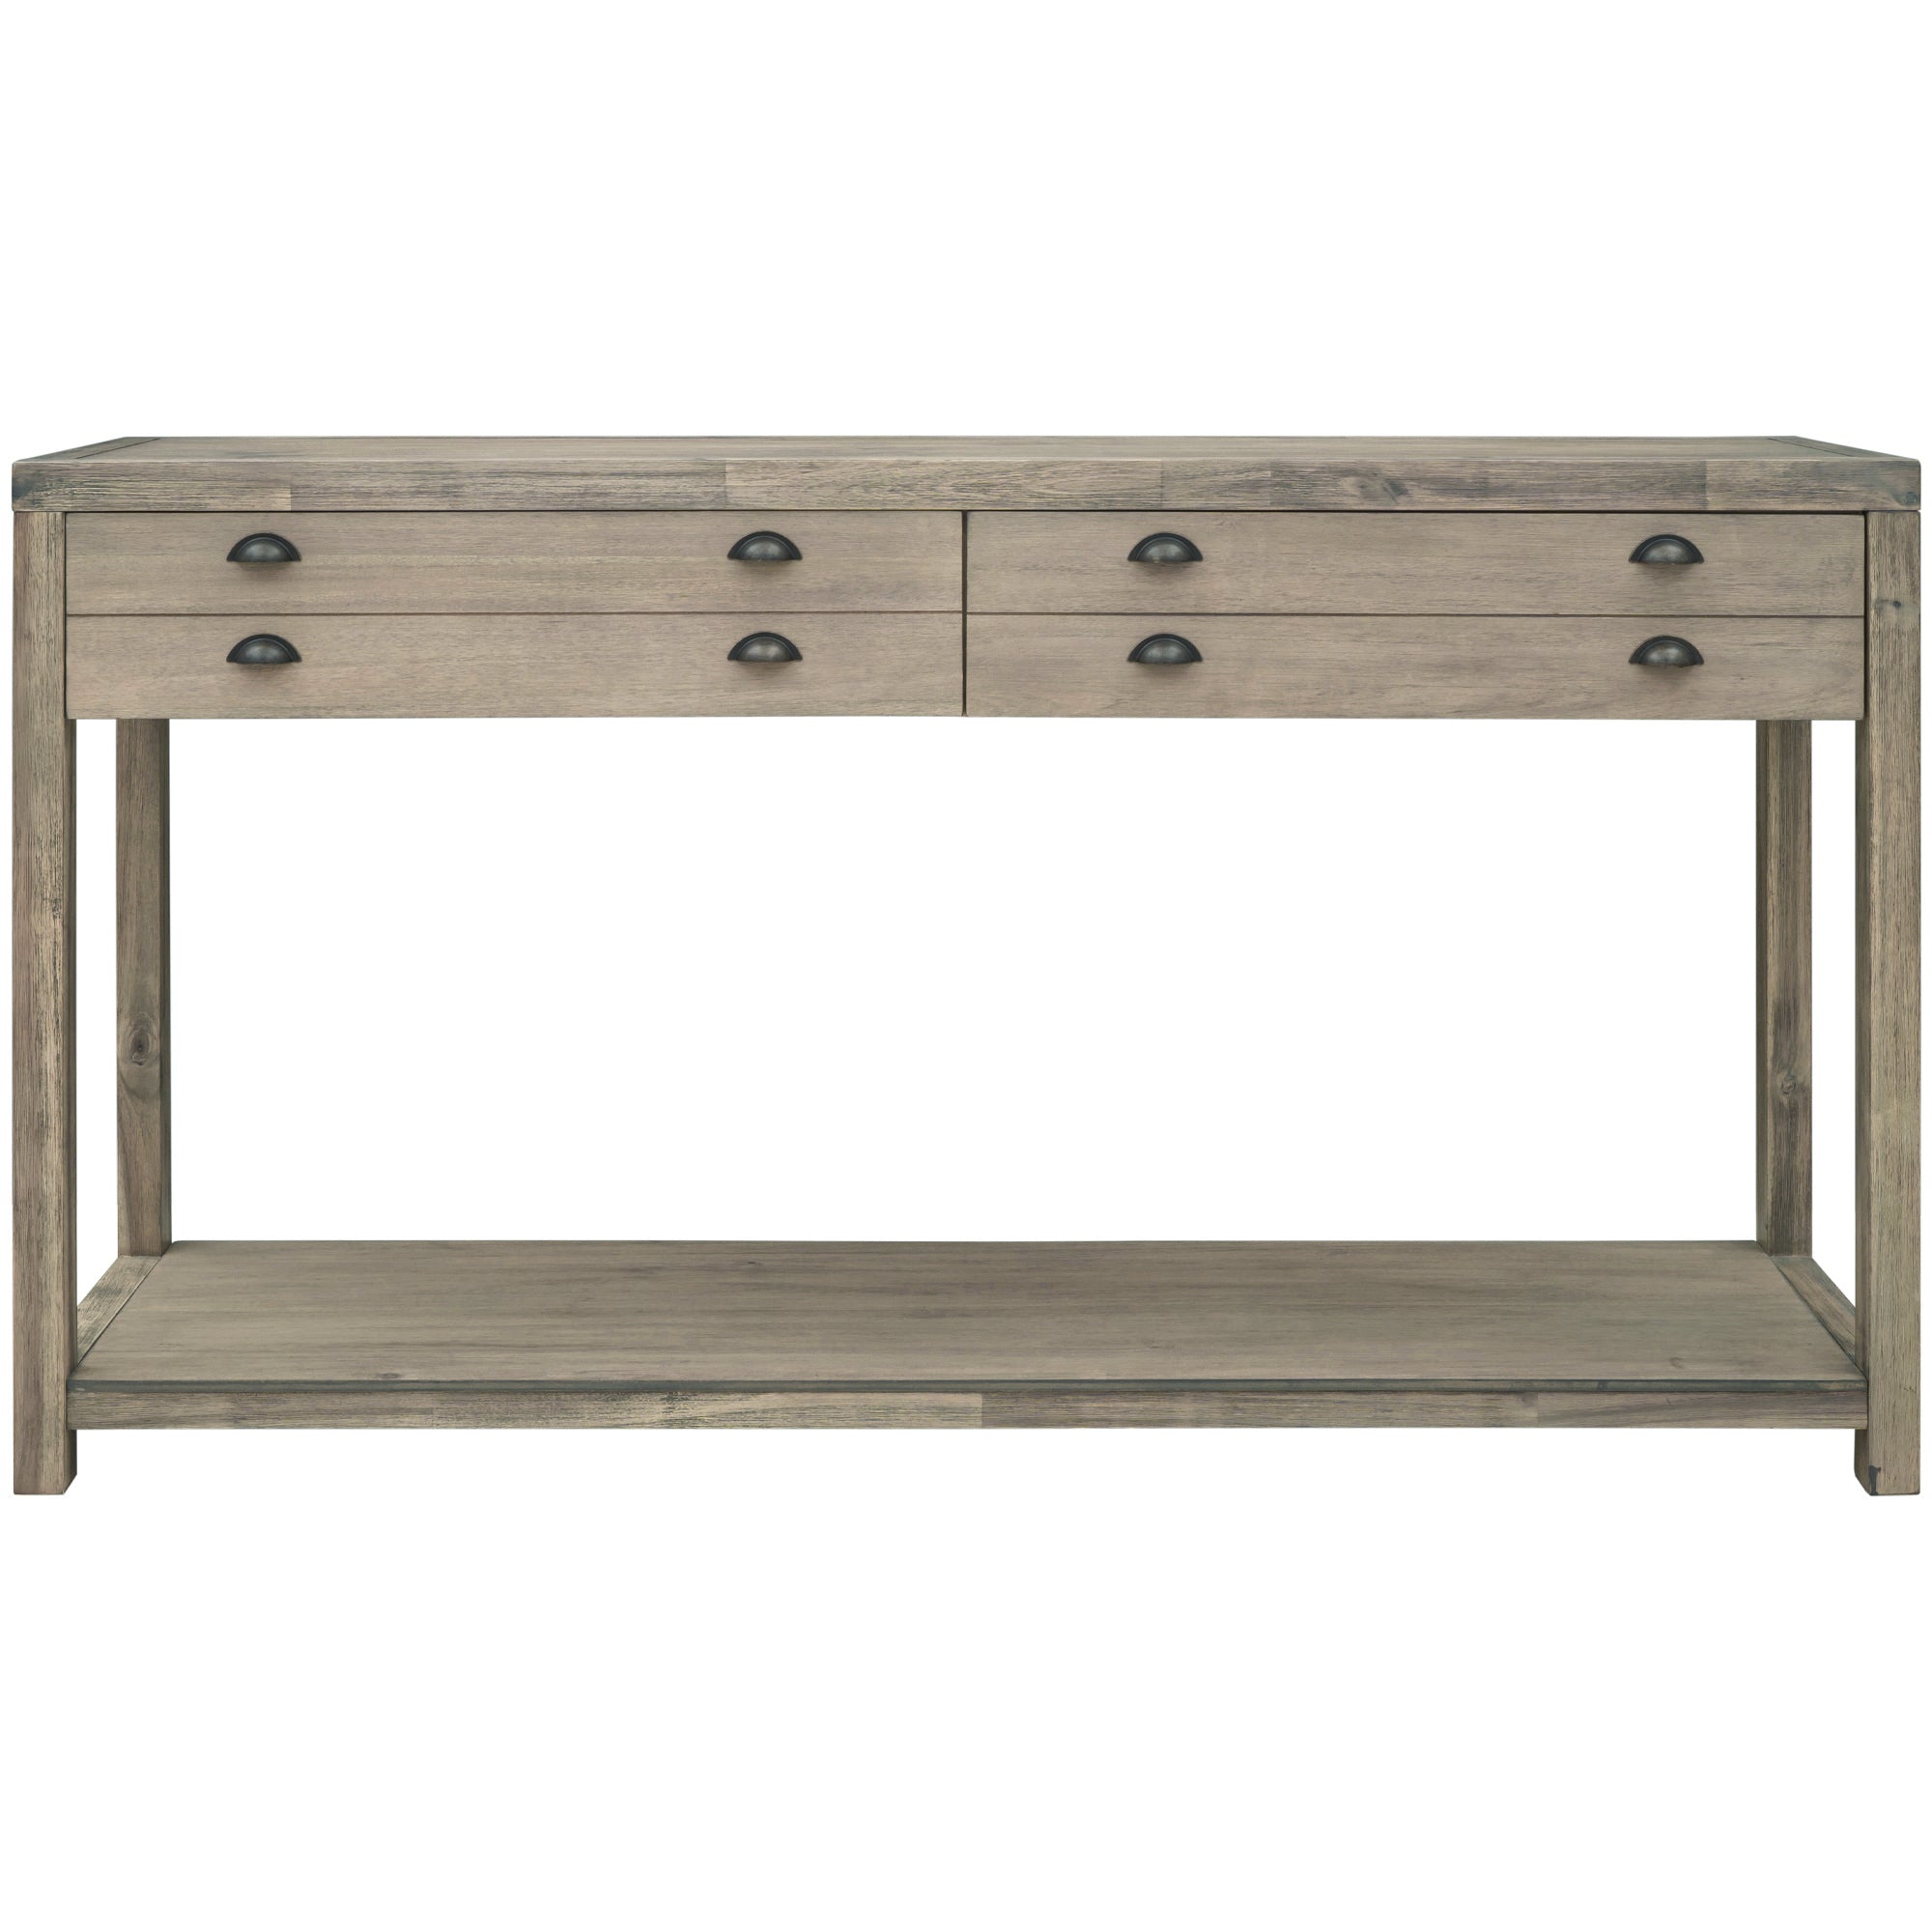 Retro Style Wooden Console Table with Two Big Top Drawers and Open Style Shelf Large Storage Space-Boyel Living